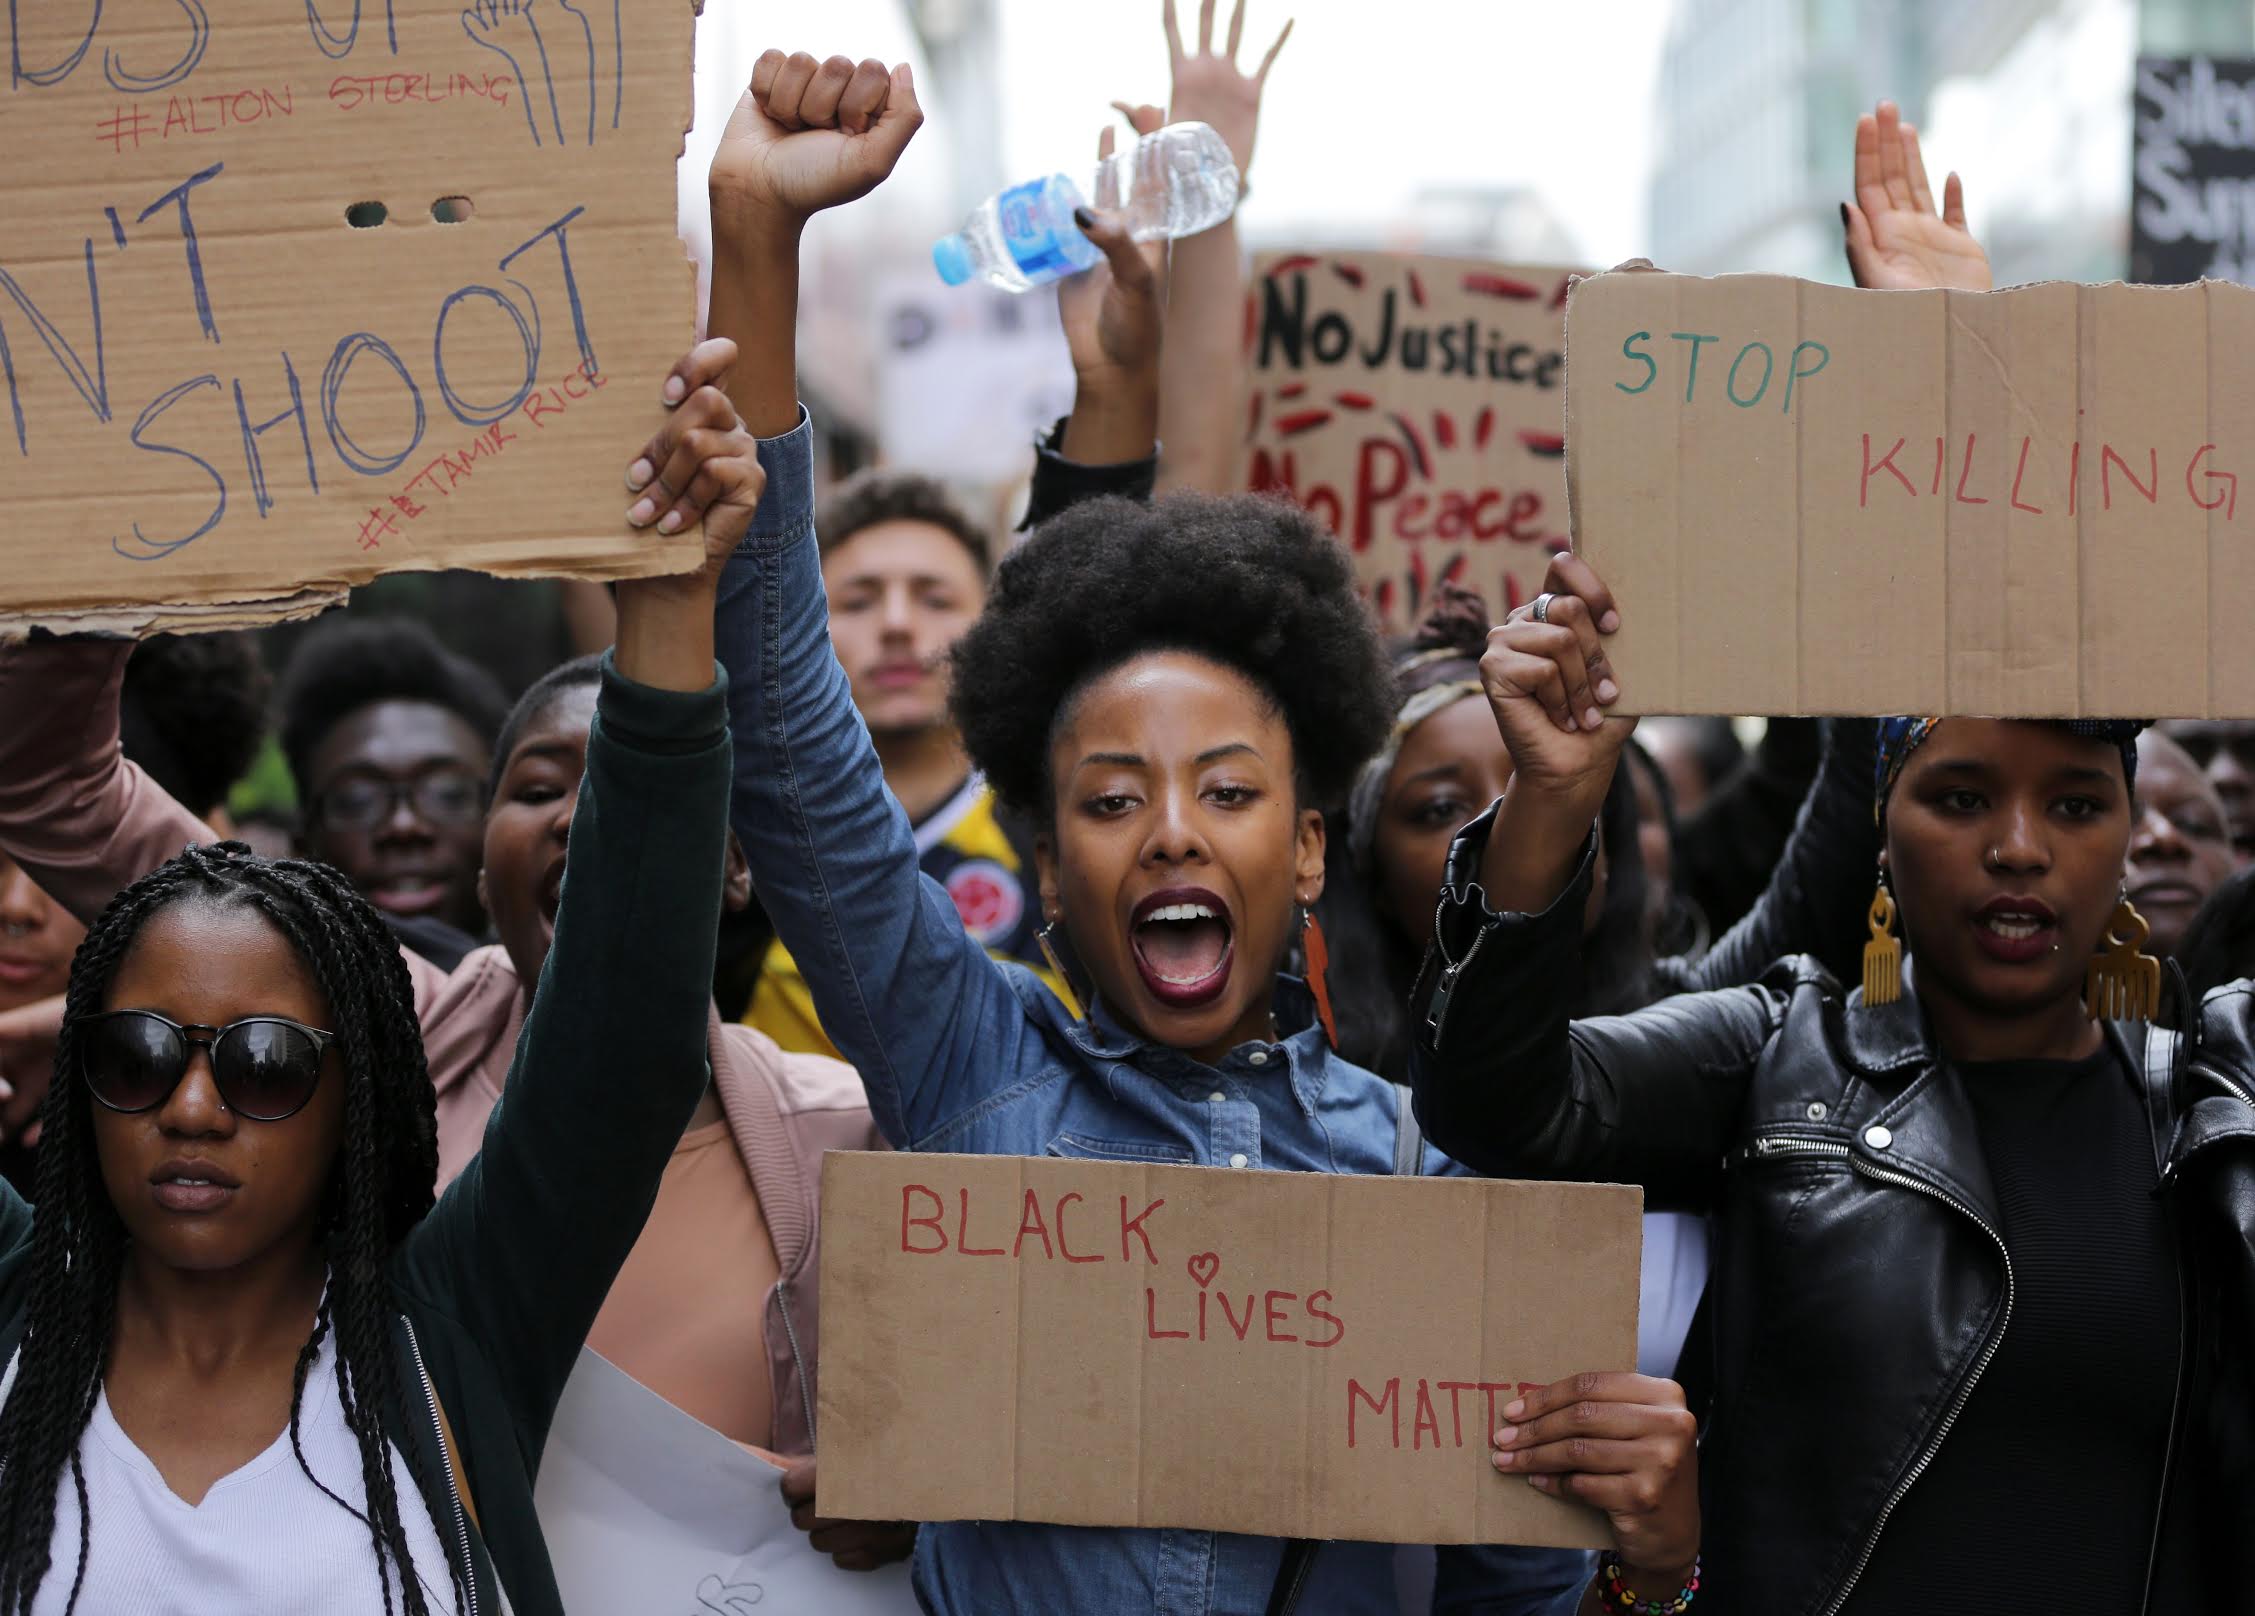 photograph of a protesters holding signs and raising their fists during a Black Lives Matter protest